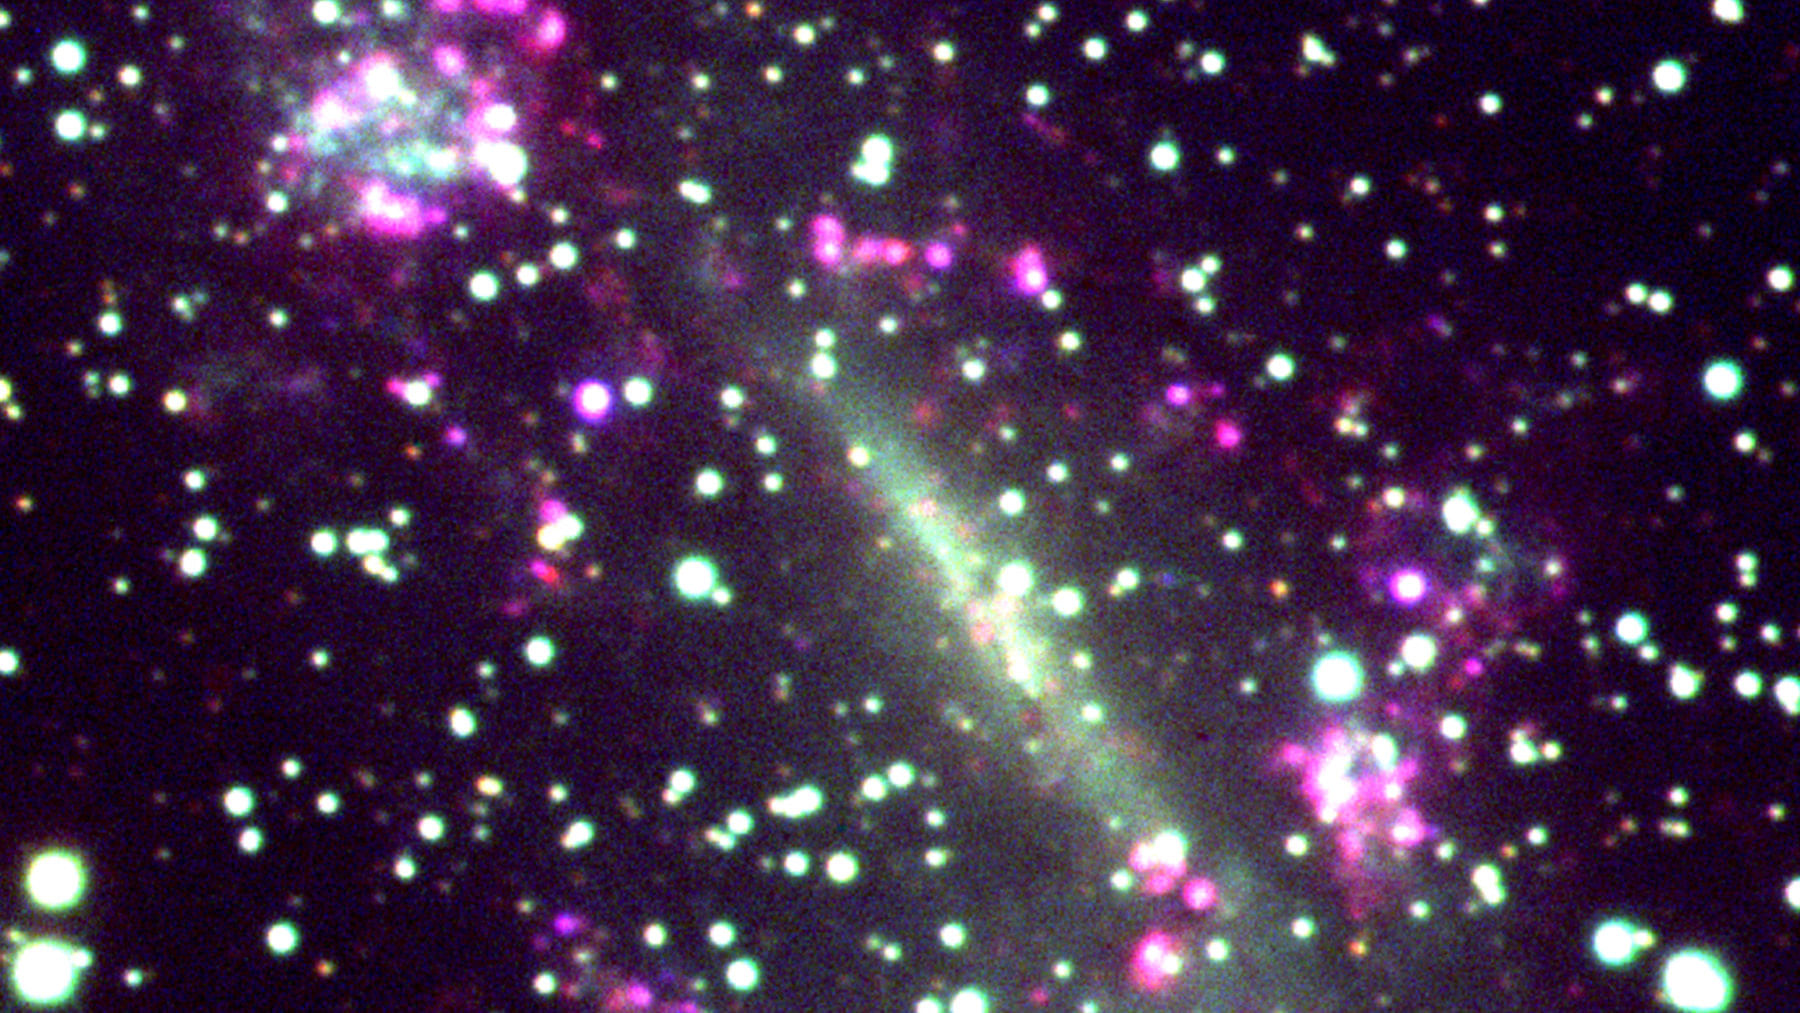 The ring is 30 million light years away and
is called “Kathryn’s wheel”. (Photo: <a href="http://phys.org/news/2015-08-celestial-firework-nearest-galaxy-collision.html">Phys.org</a>)